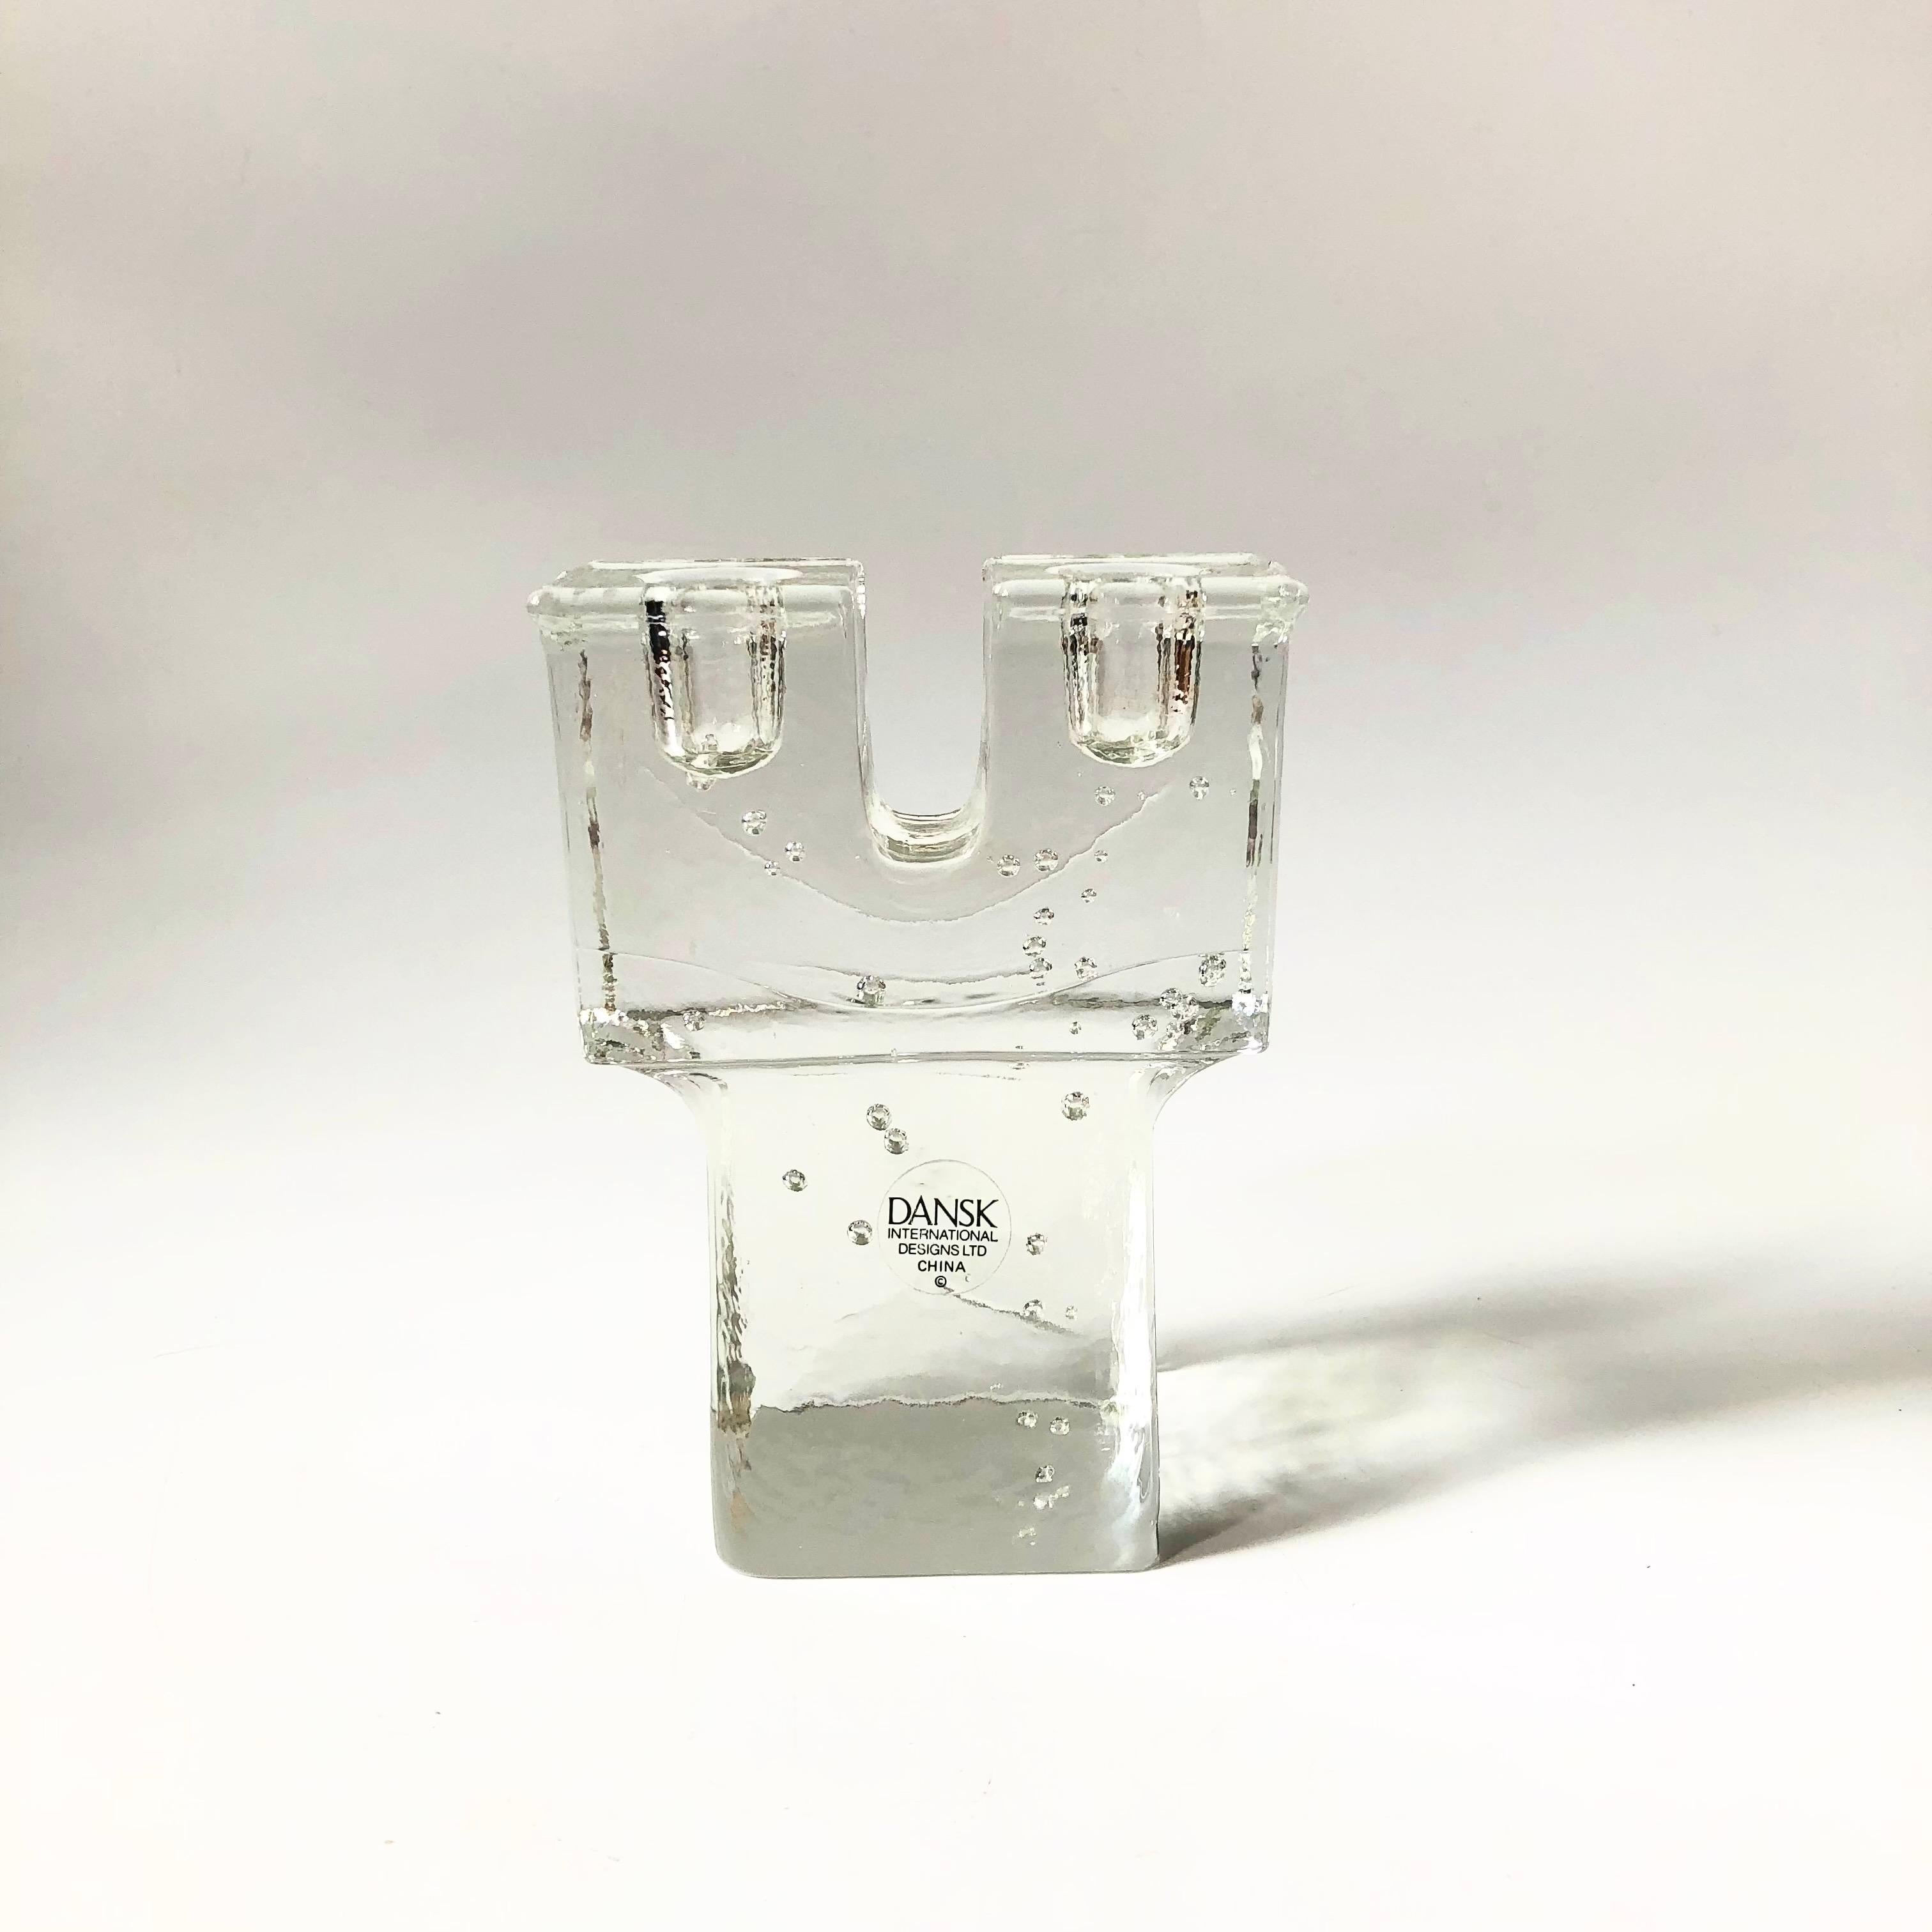 A vintage Dansk glass double candle holder. Nice blocky shape with little bubbles formed throughout the glass. Made in China by Dansk, most likely in the 1990s.

